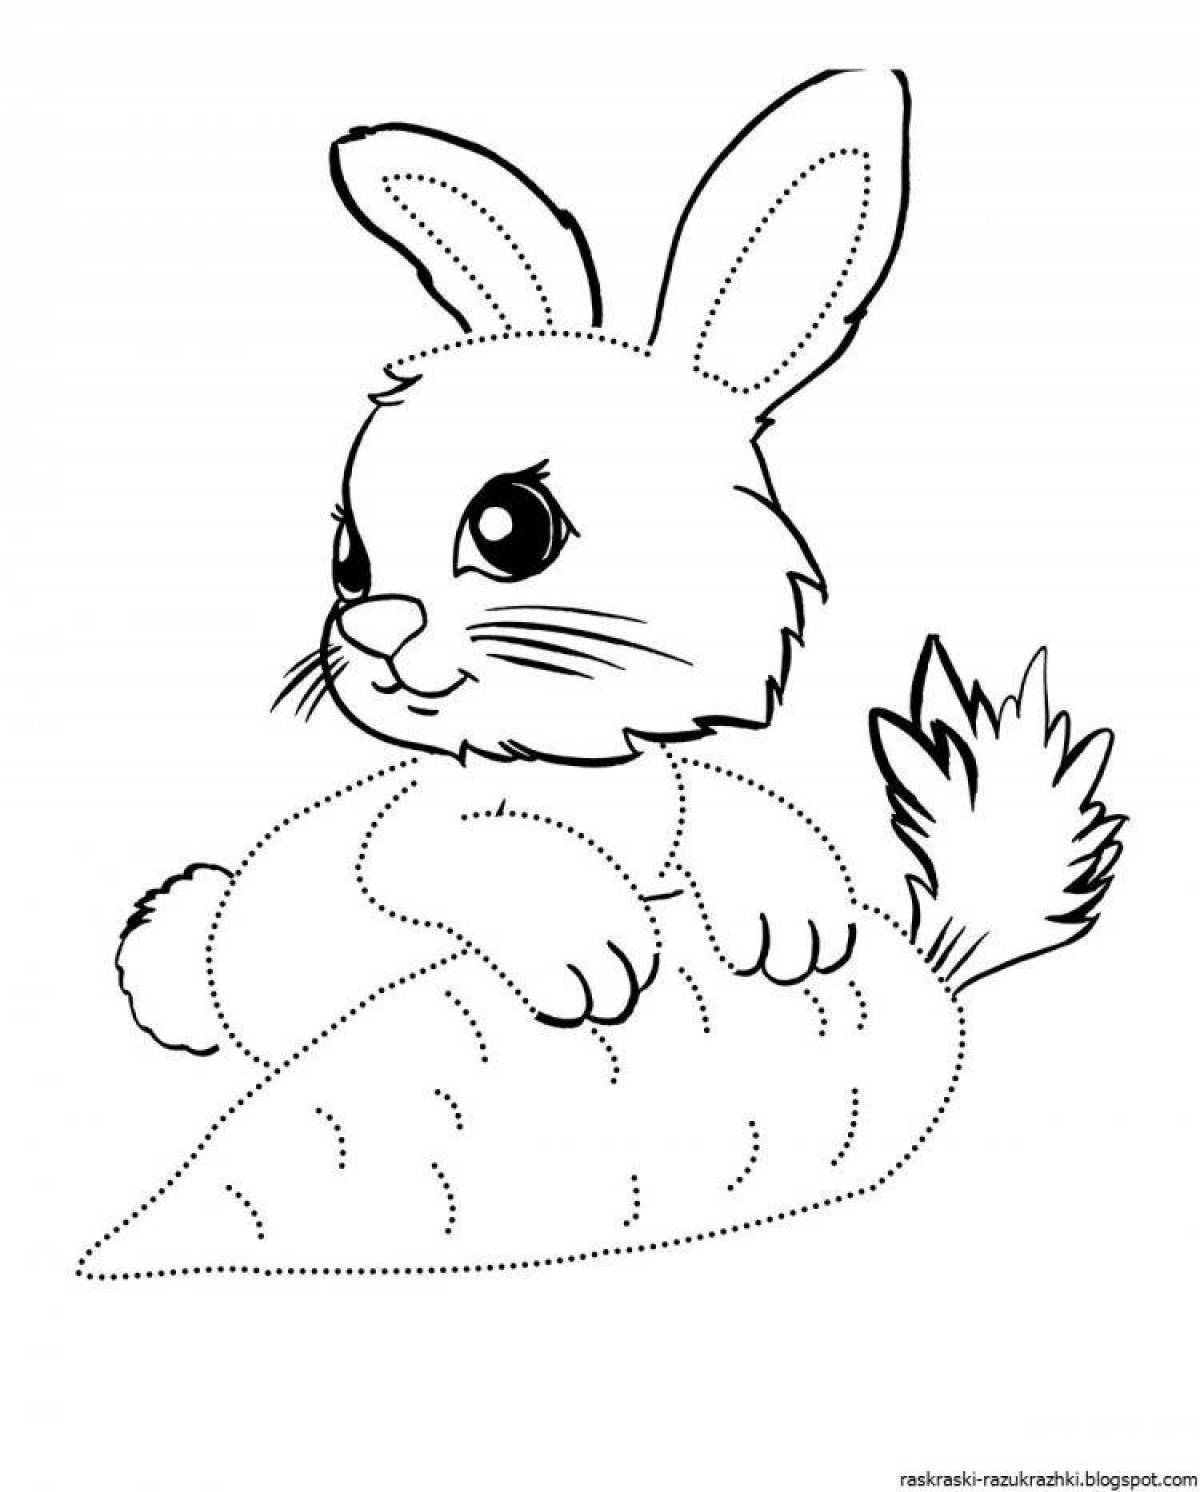 Cute rabbit with carrot coloring book